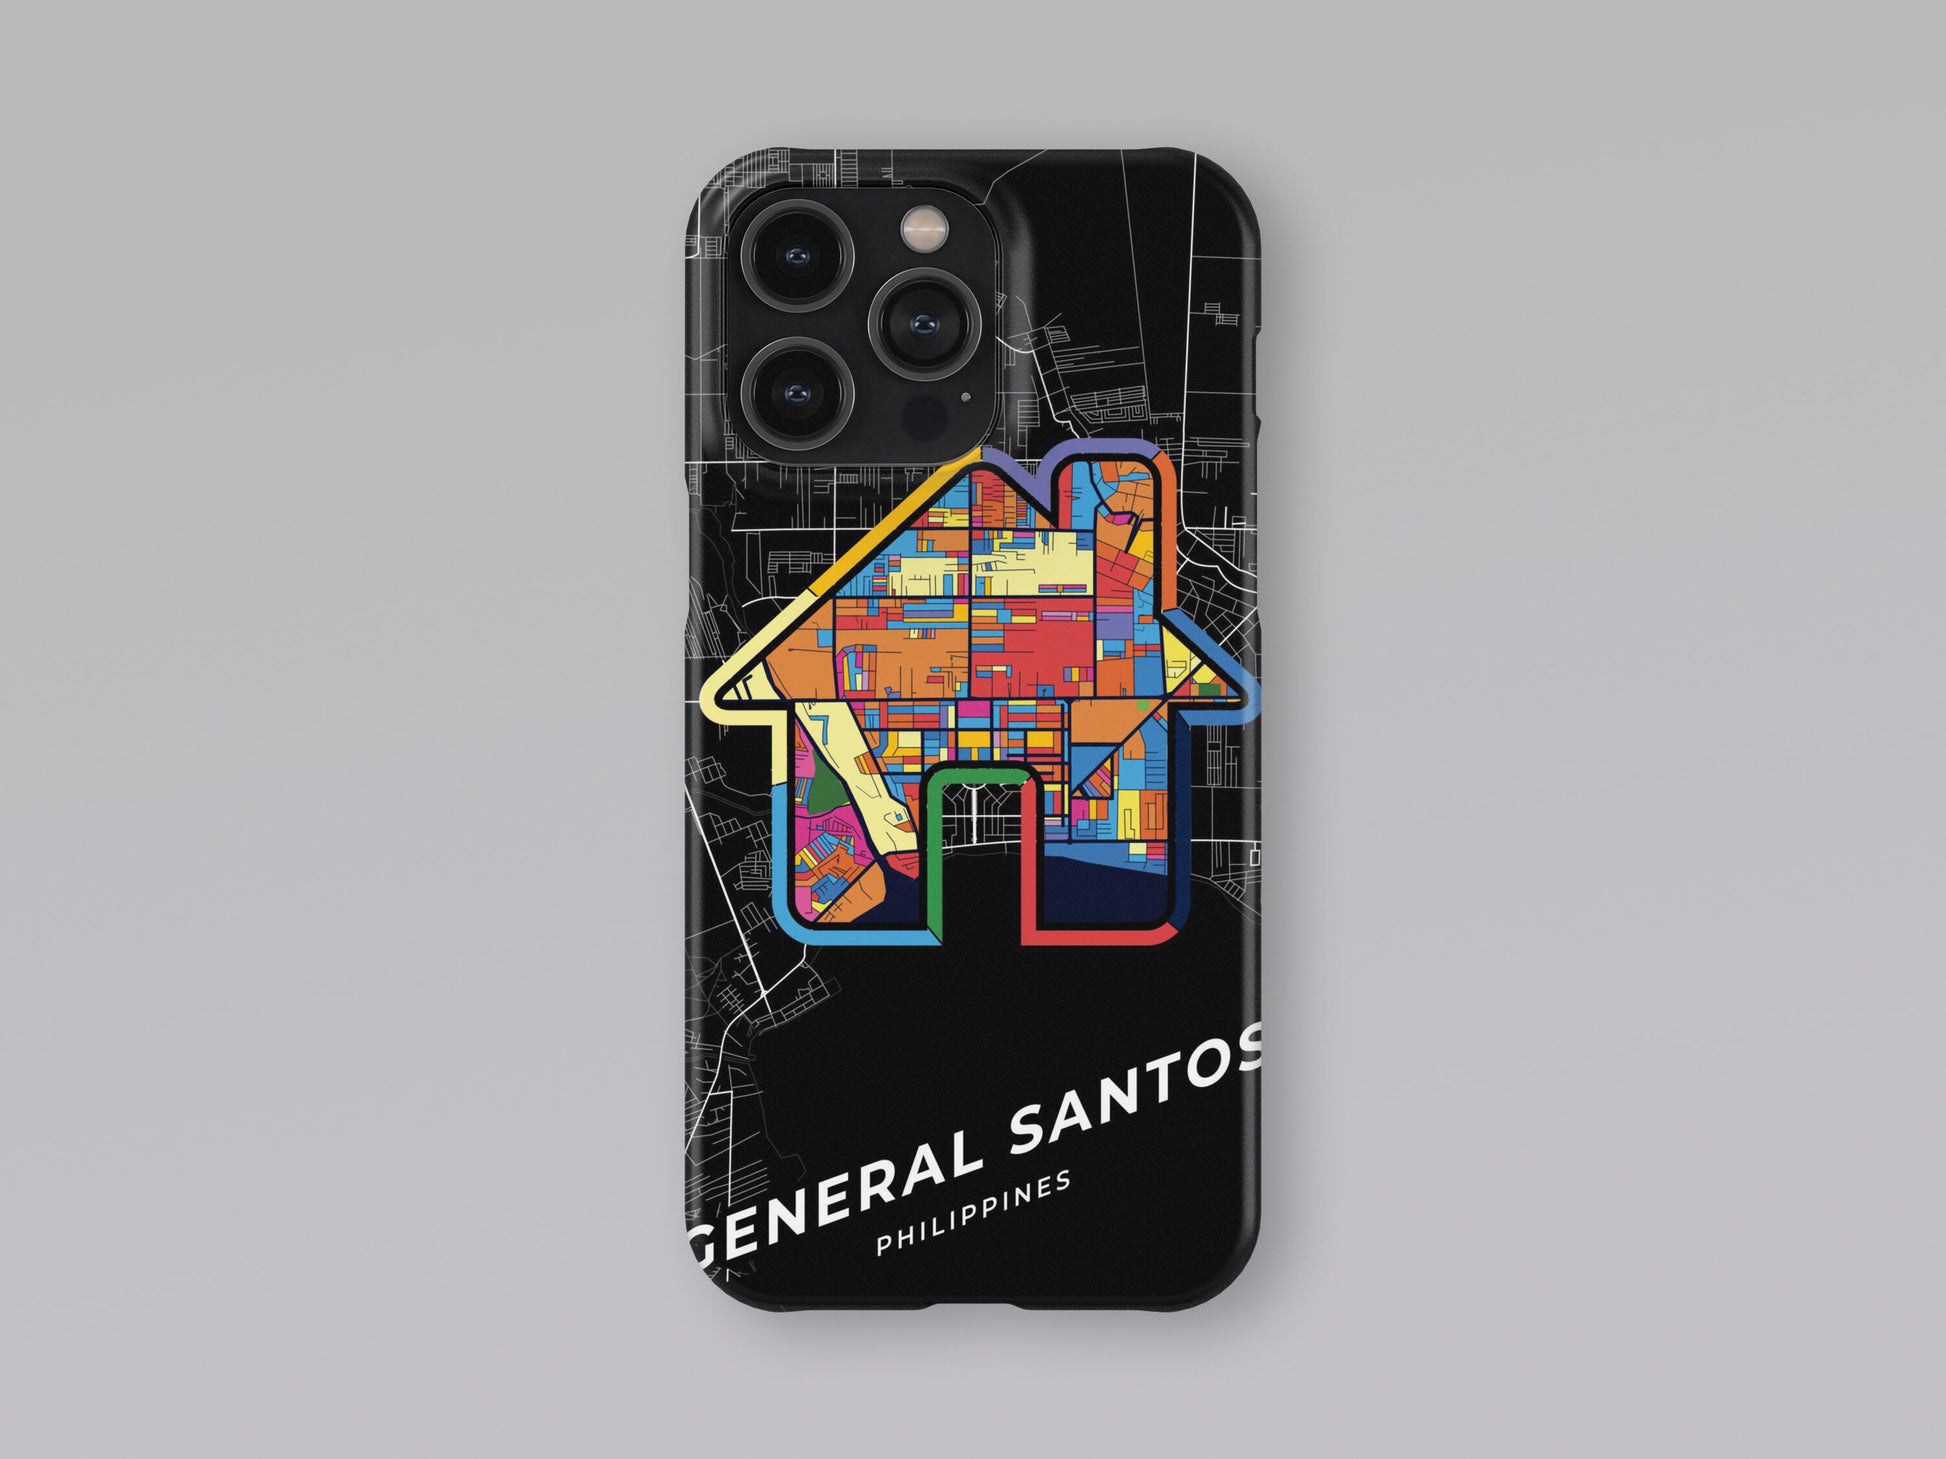 General Santos Philippines slim phone case with colorful icon. Birthday, wedding or housewarming gift. Couple match cases. 3